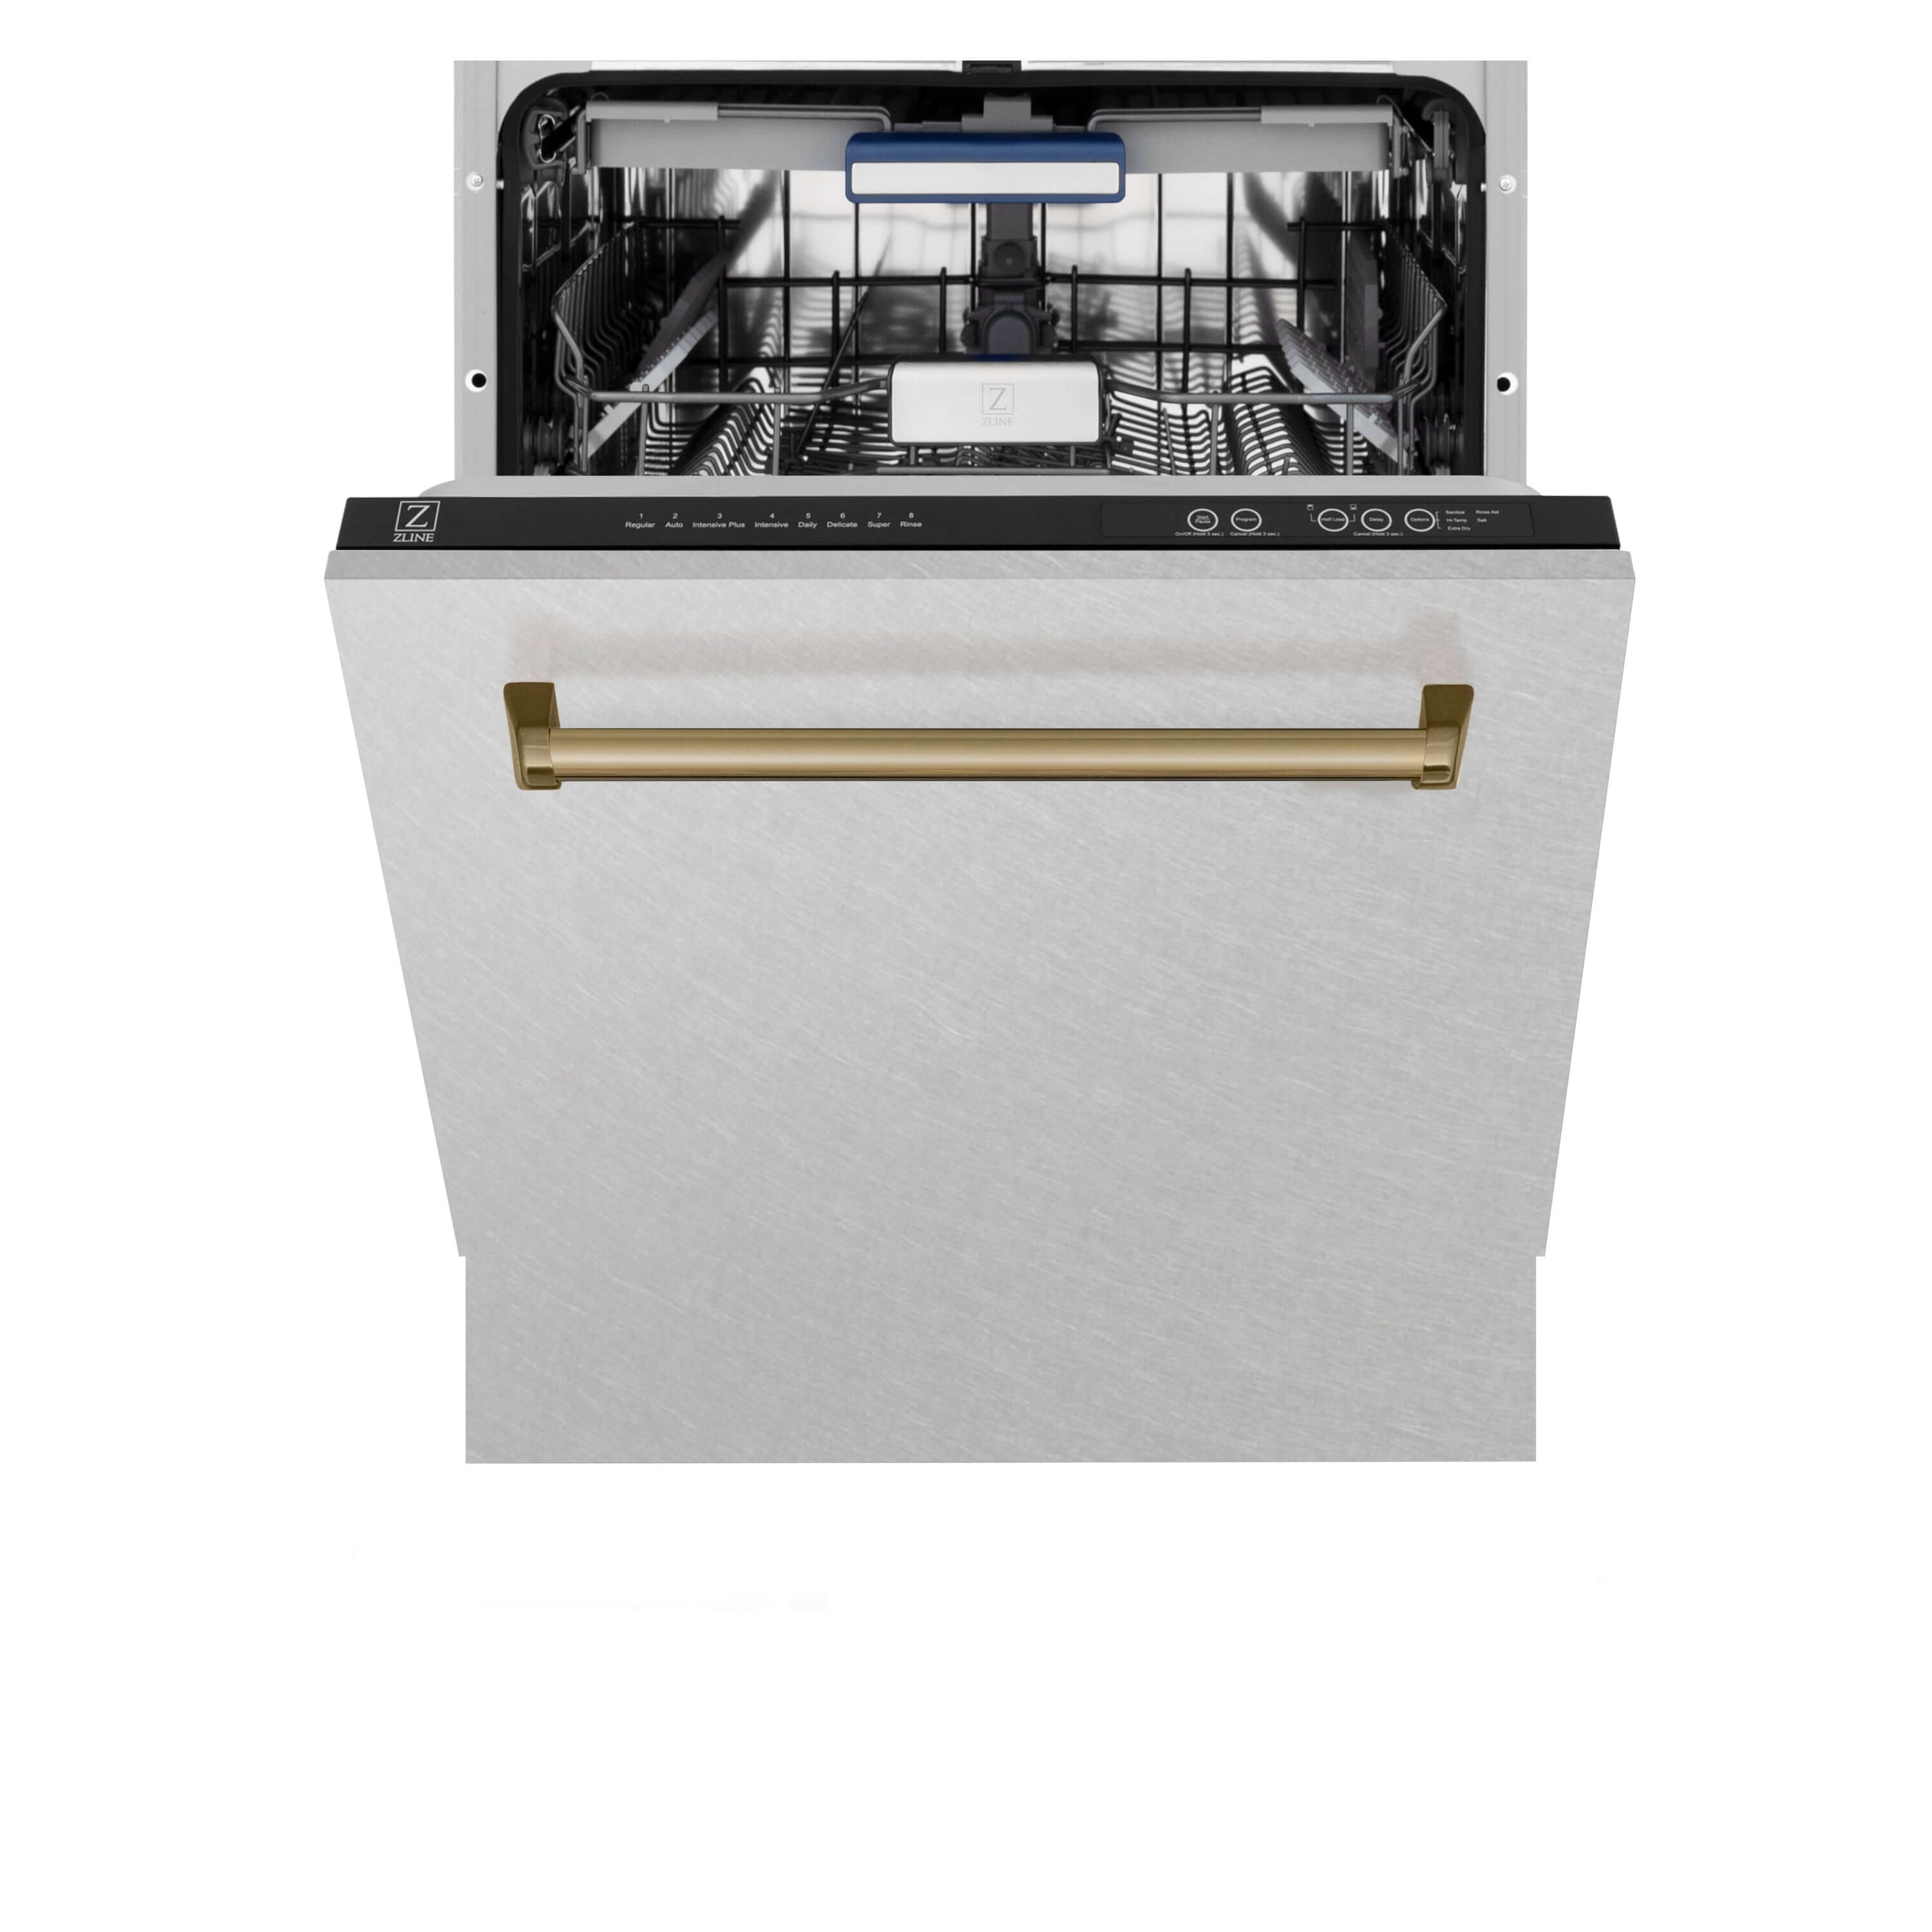 ZLINE Autograph Edition 24 in. Tallac Series 3rd Rack Top Control Built-In Tall Tub Dishwasher in Fingerprint Resistant Stainless Steel with Champagne Bronze Handle, 51dBa (DWVZ-SN-24-CB) front, half open.